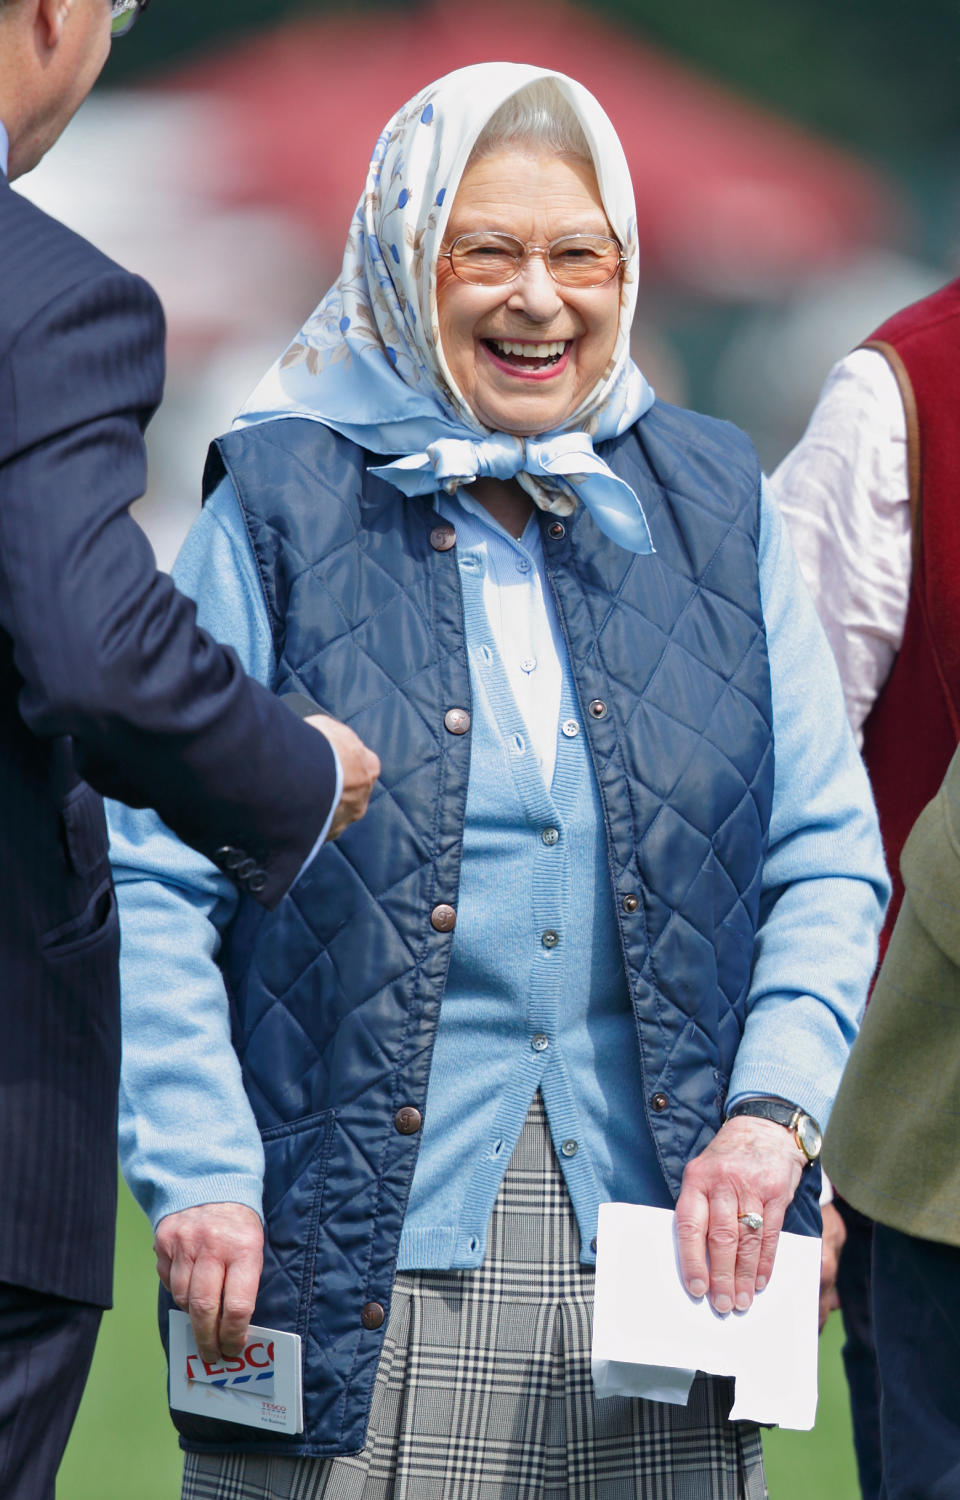 Queen Elizabeth II laughs as she receives a Tesco Gift Card as a prize after her horse 'Barber's Shop' won the Tattersalls and RoR Thoroughbred Ridden Show Series Championship on day 2 of the Royal Windsor Horse Show in Home Park on May 12, 2016 in Windsor, England. (Photo by Max Mumby/Indigo/Getty Images)